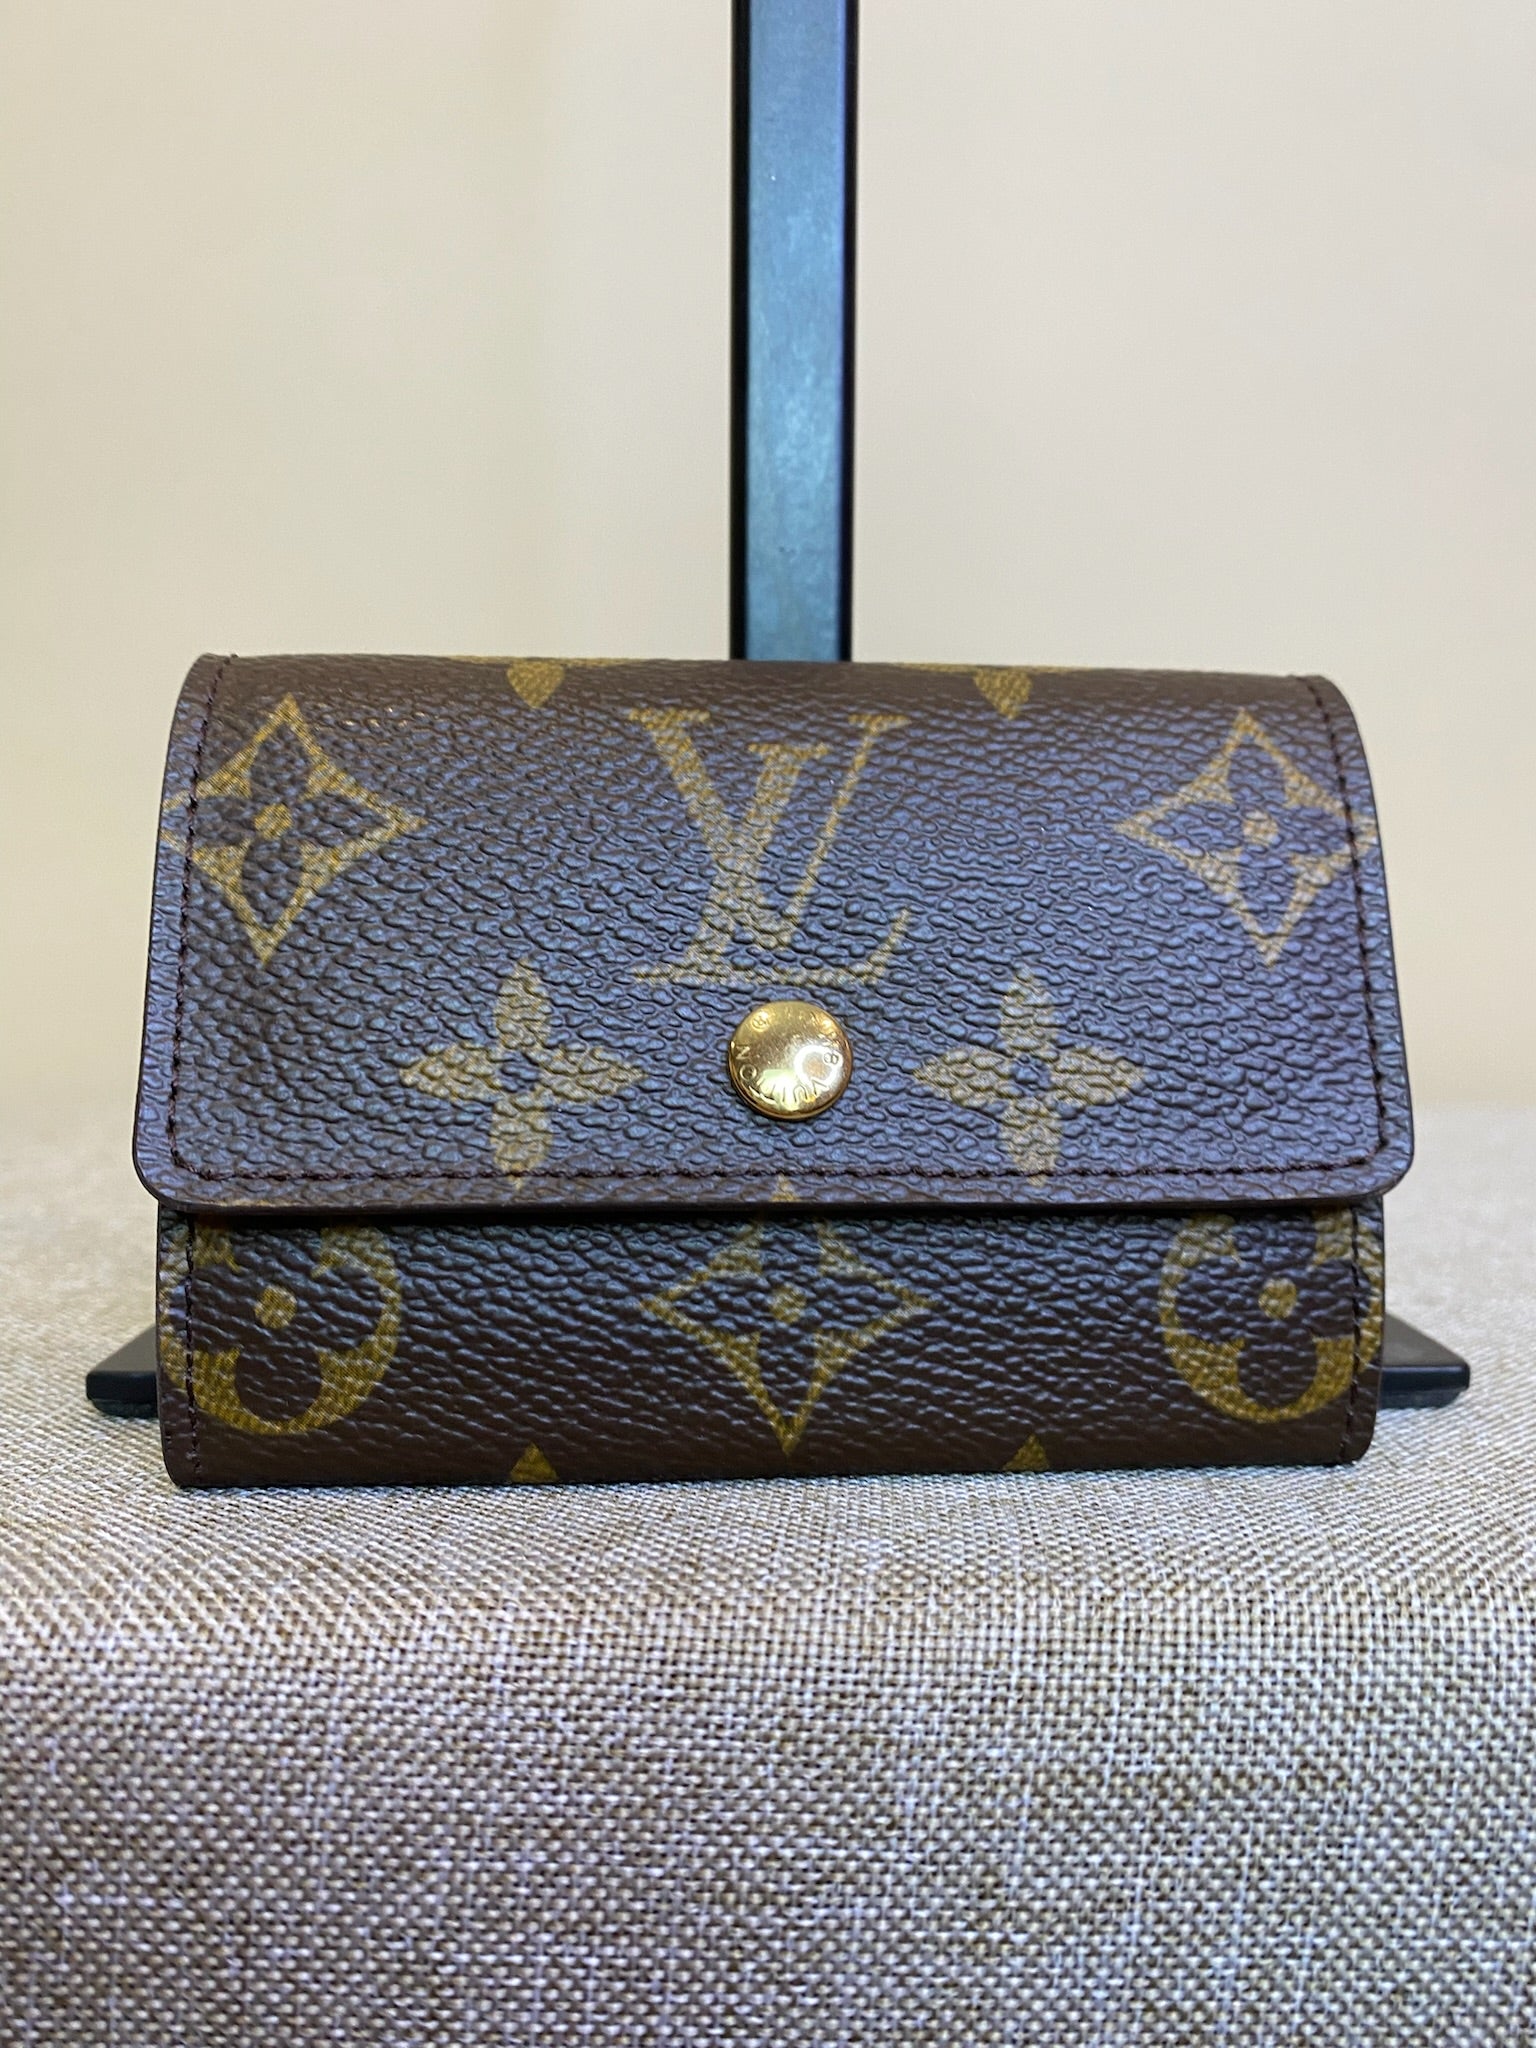 Pre-Owned Louis Vuitton Compact Wallet- 2252RY14 